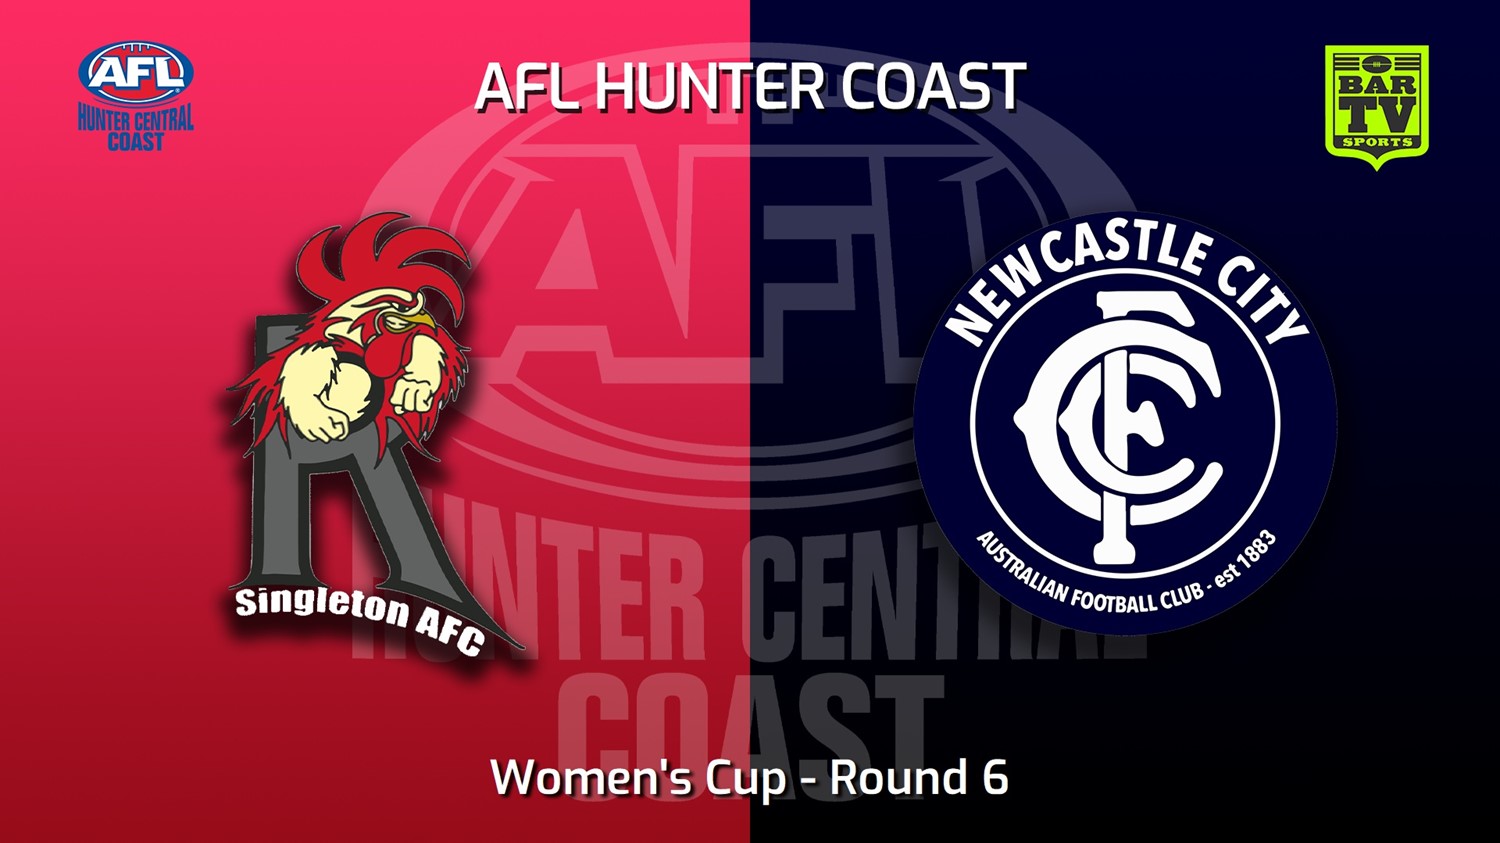 220618-AFL Hunter Central Coast Round 6 - Women's Cup - Singleton Roosters v Newcastle City  Minigame Slate Image